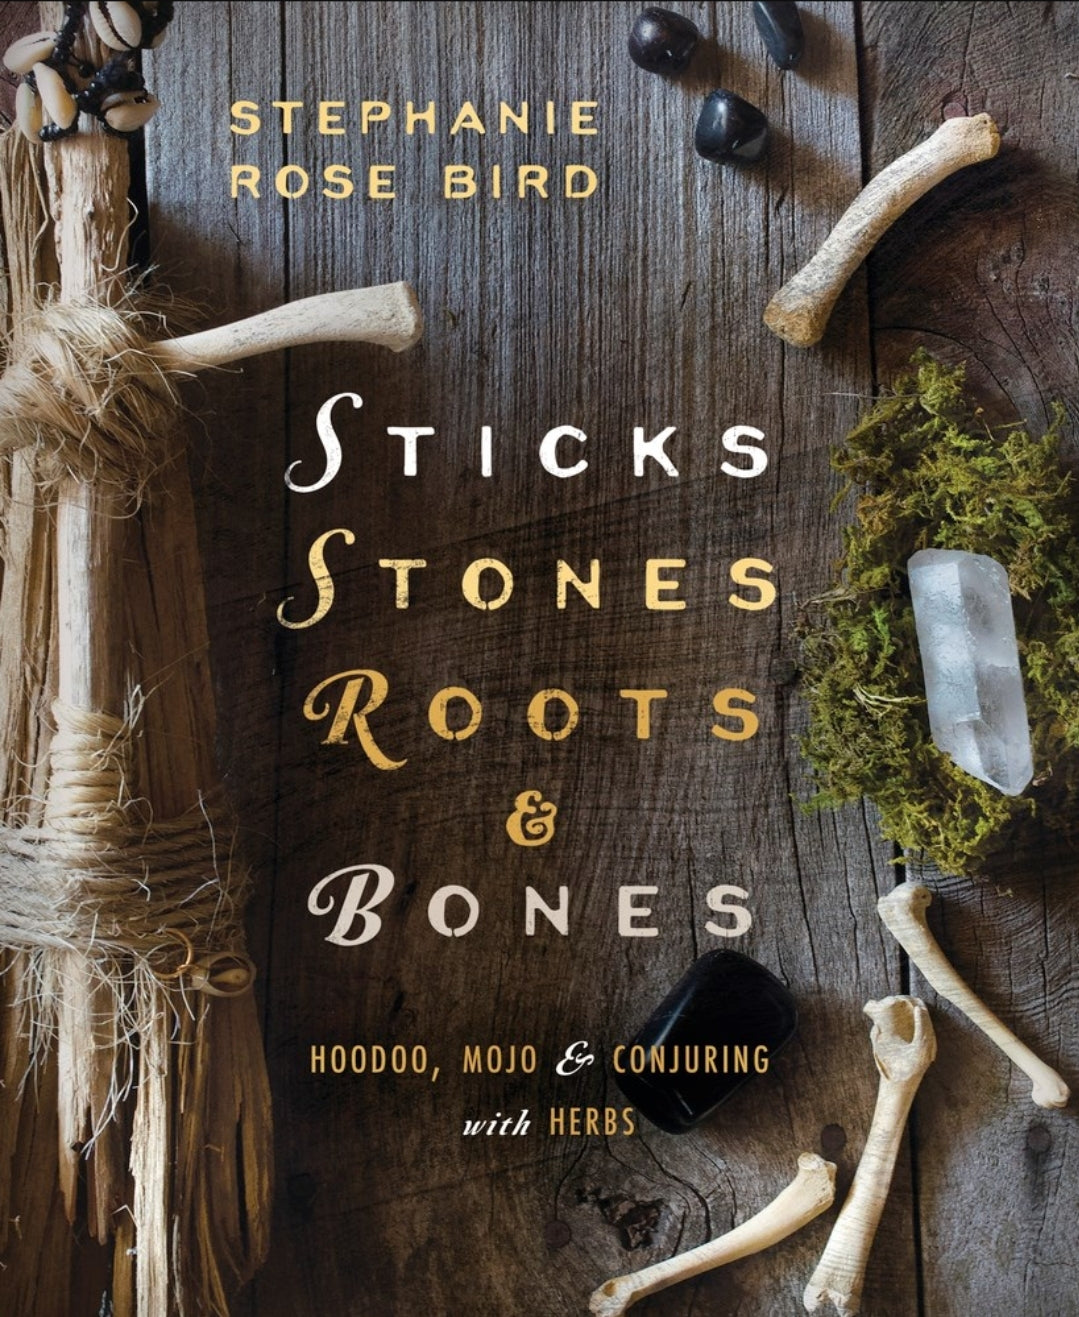 Sticks, Stones, Roots & Bones: Hoodoo, Mojo & Conjuring with Herbs

by Stephanie Rose Bird AUTHOR